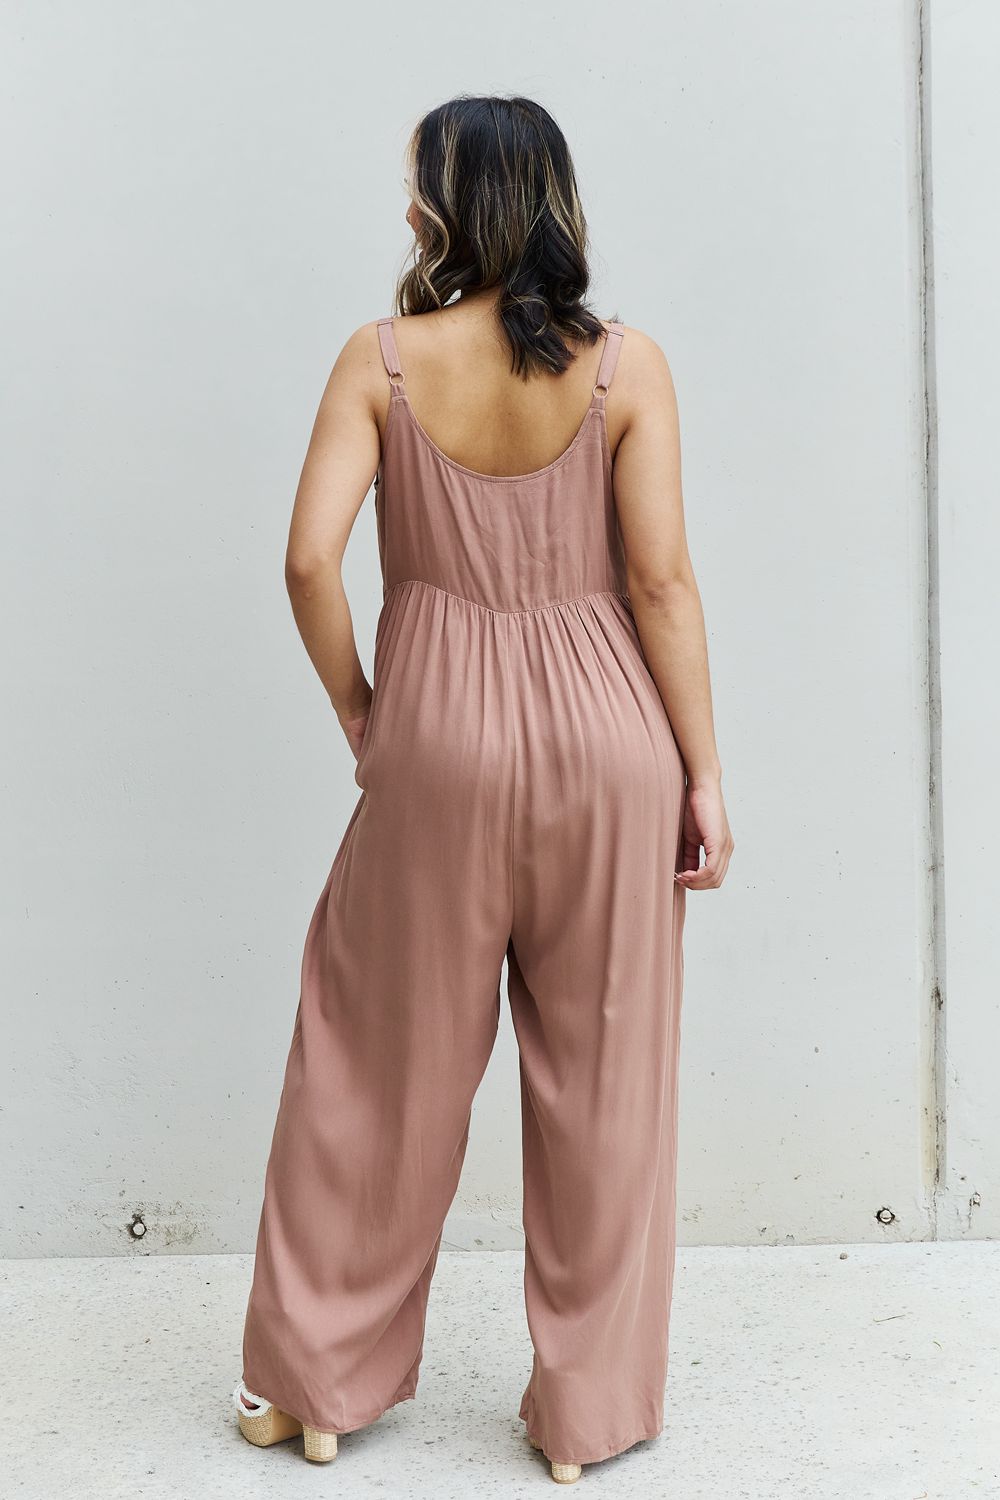 HEYSON All Day Full Size Wide Leg Button Down Jumpsuit in Mocha  Sunset and Swim   